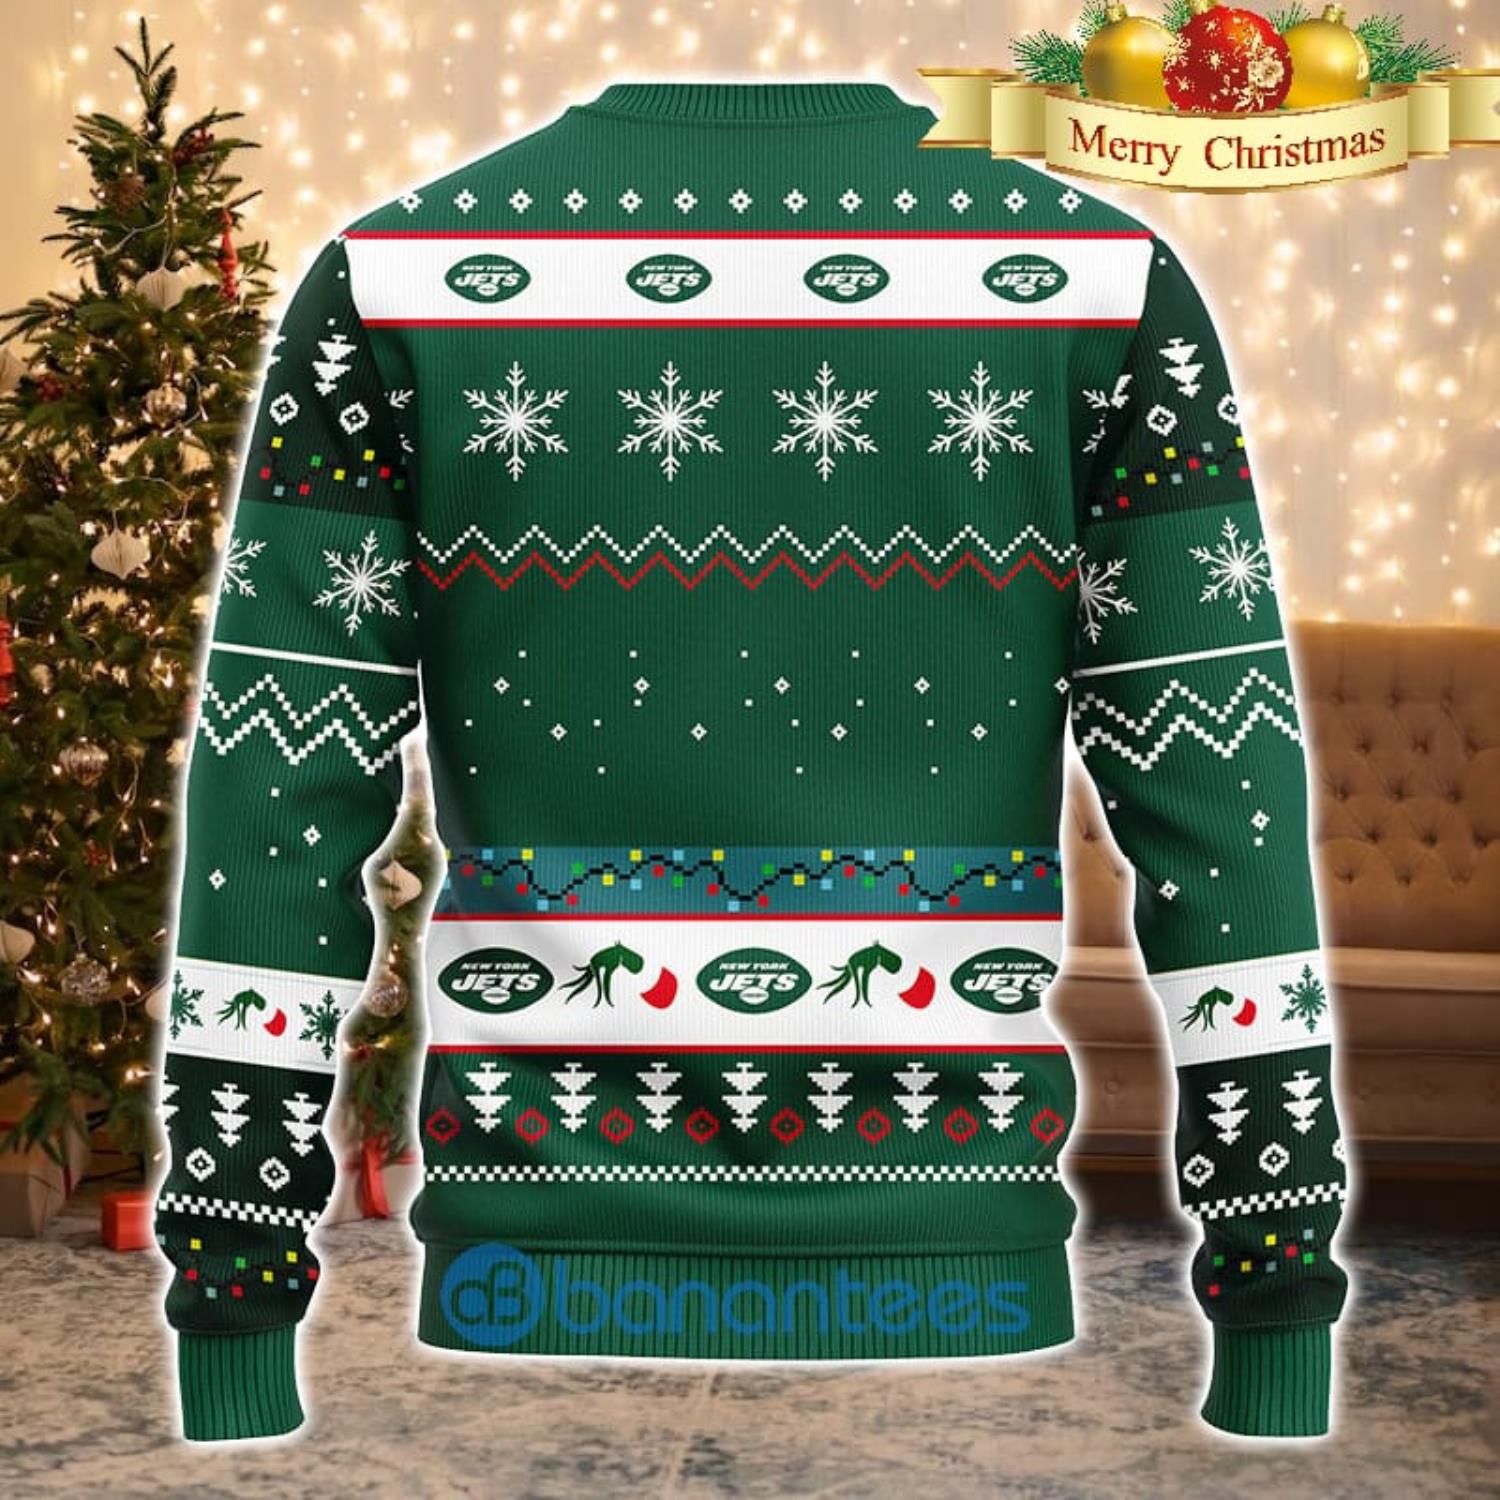 NFL New York Jets New Season Textile Knitted Christmas 3D Sweater -  Banantees